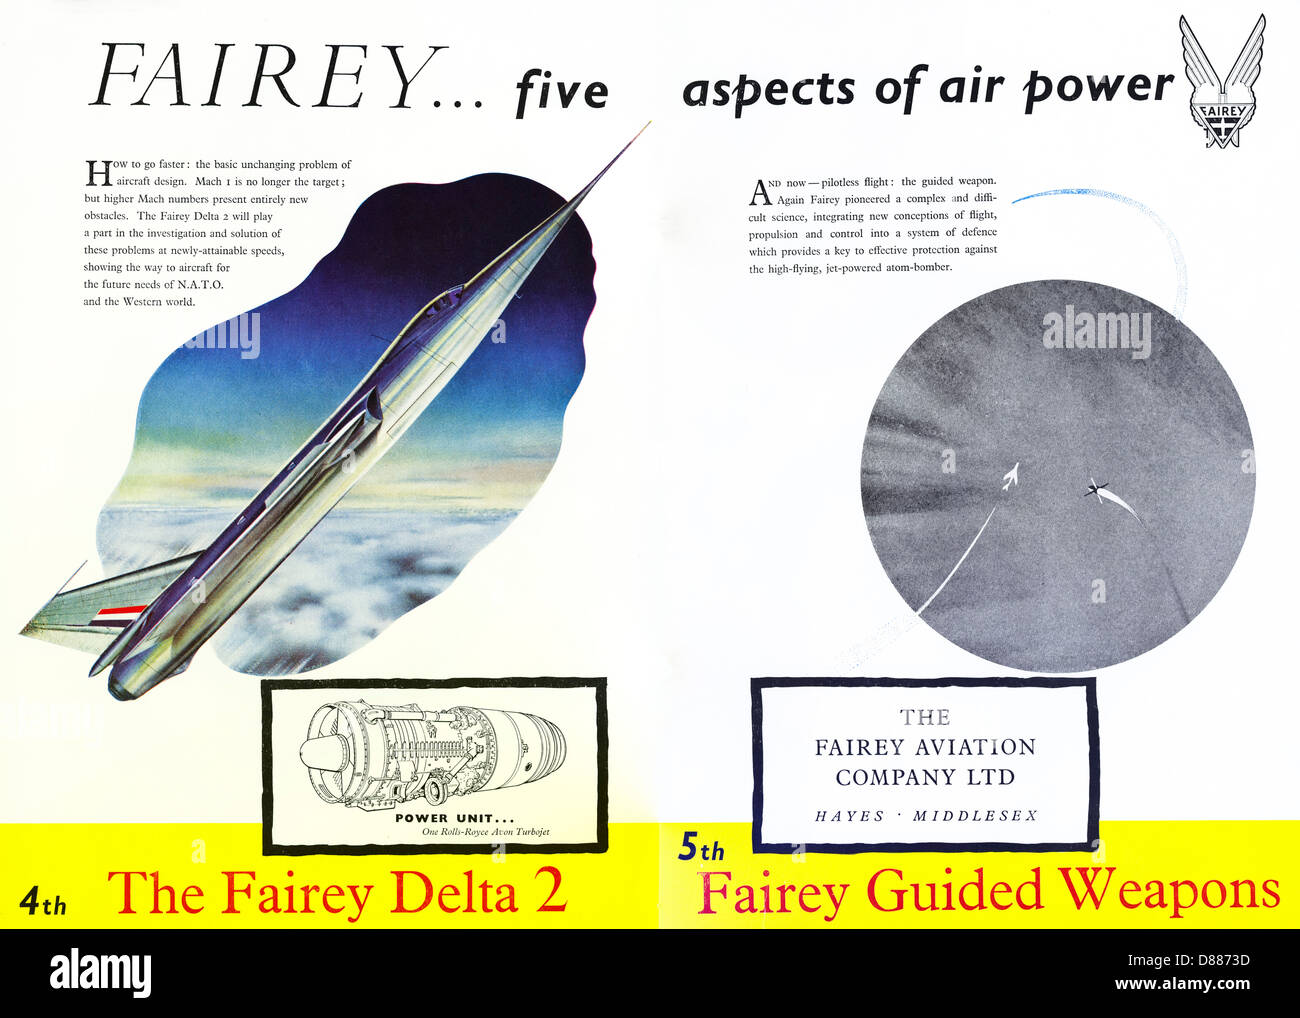 Double page advert for FAIREY JET AIRCRAFT & GUIDED WEAPONS aircraft advertisement in trade magazine circa 1955 Stock Photo